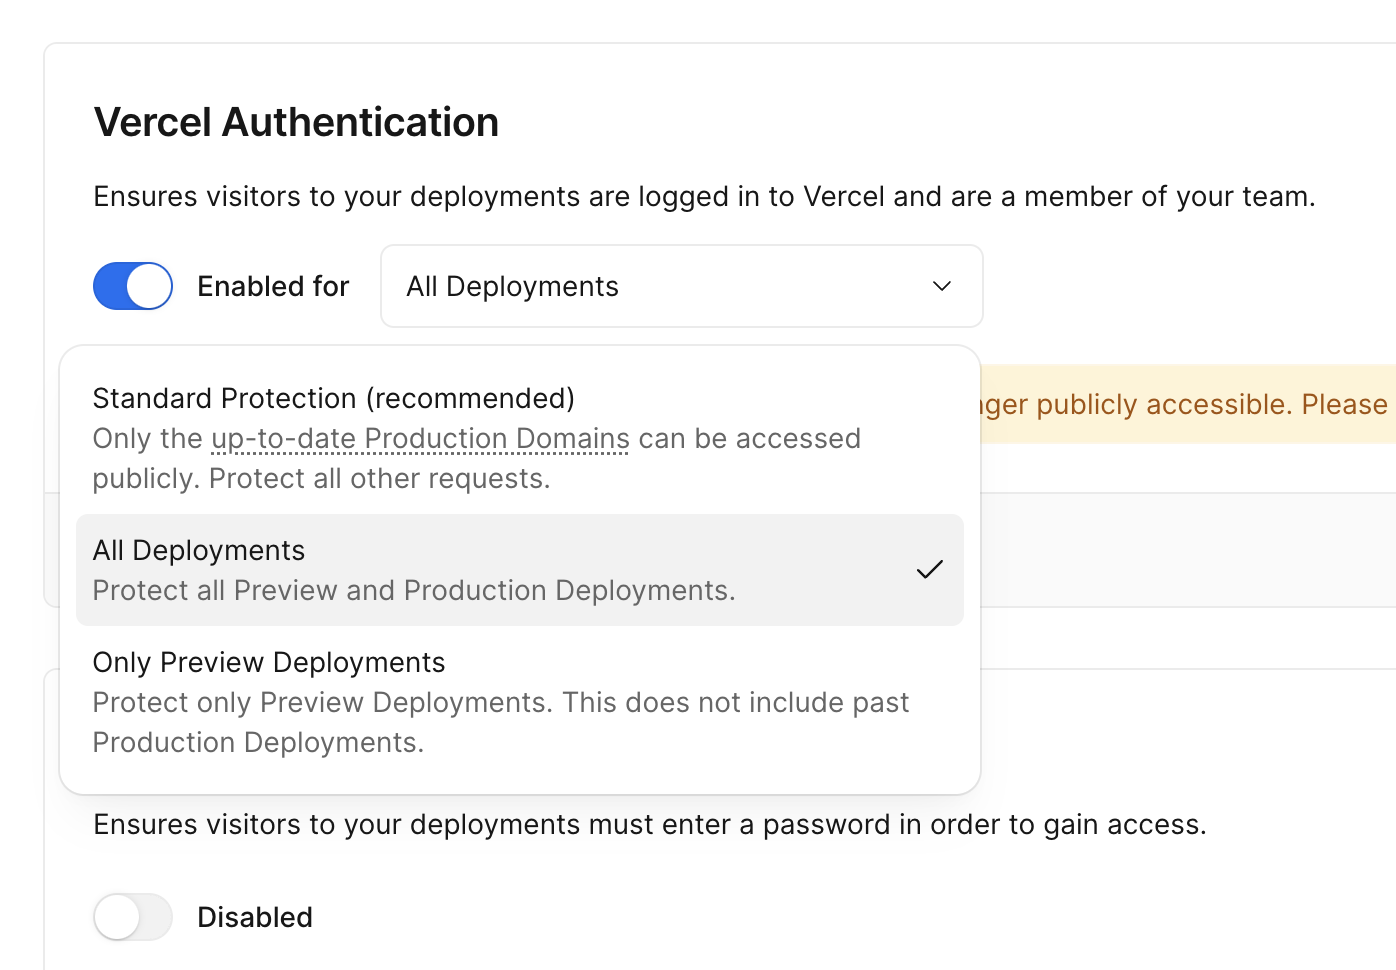 Selecting All Deployments in the Vercel Dashboard.